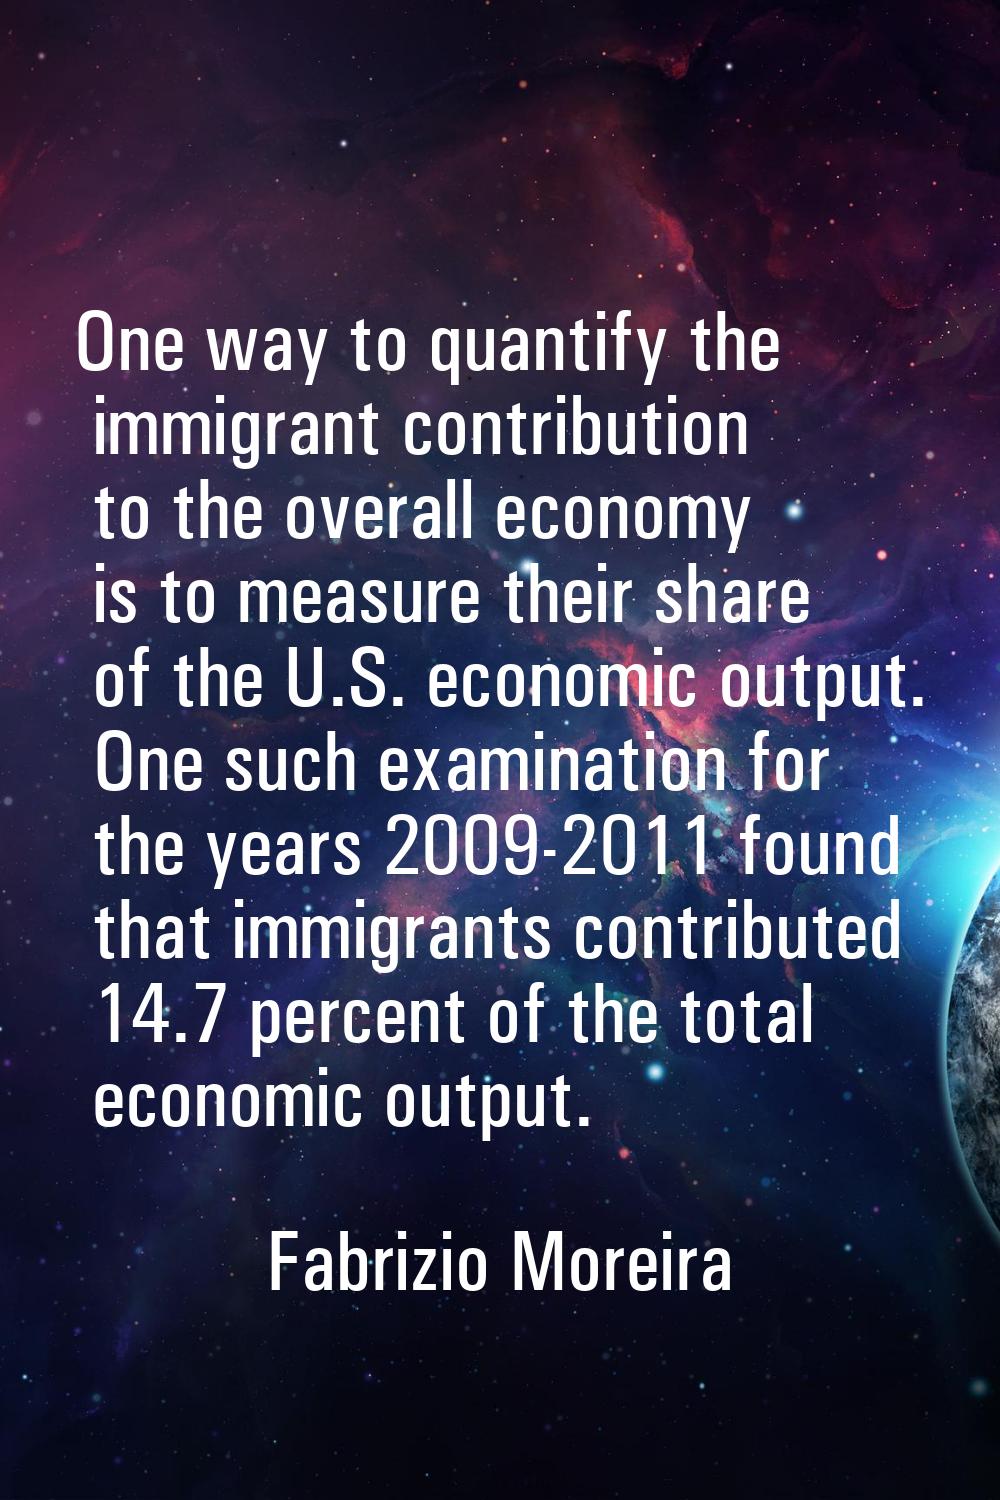 One way to quantify the immigrant contribution to the overall economy is to measure their share of 